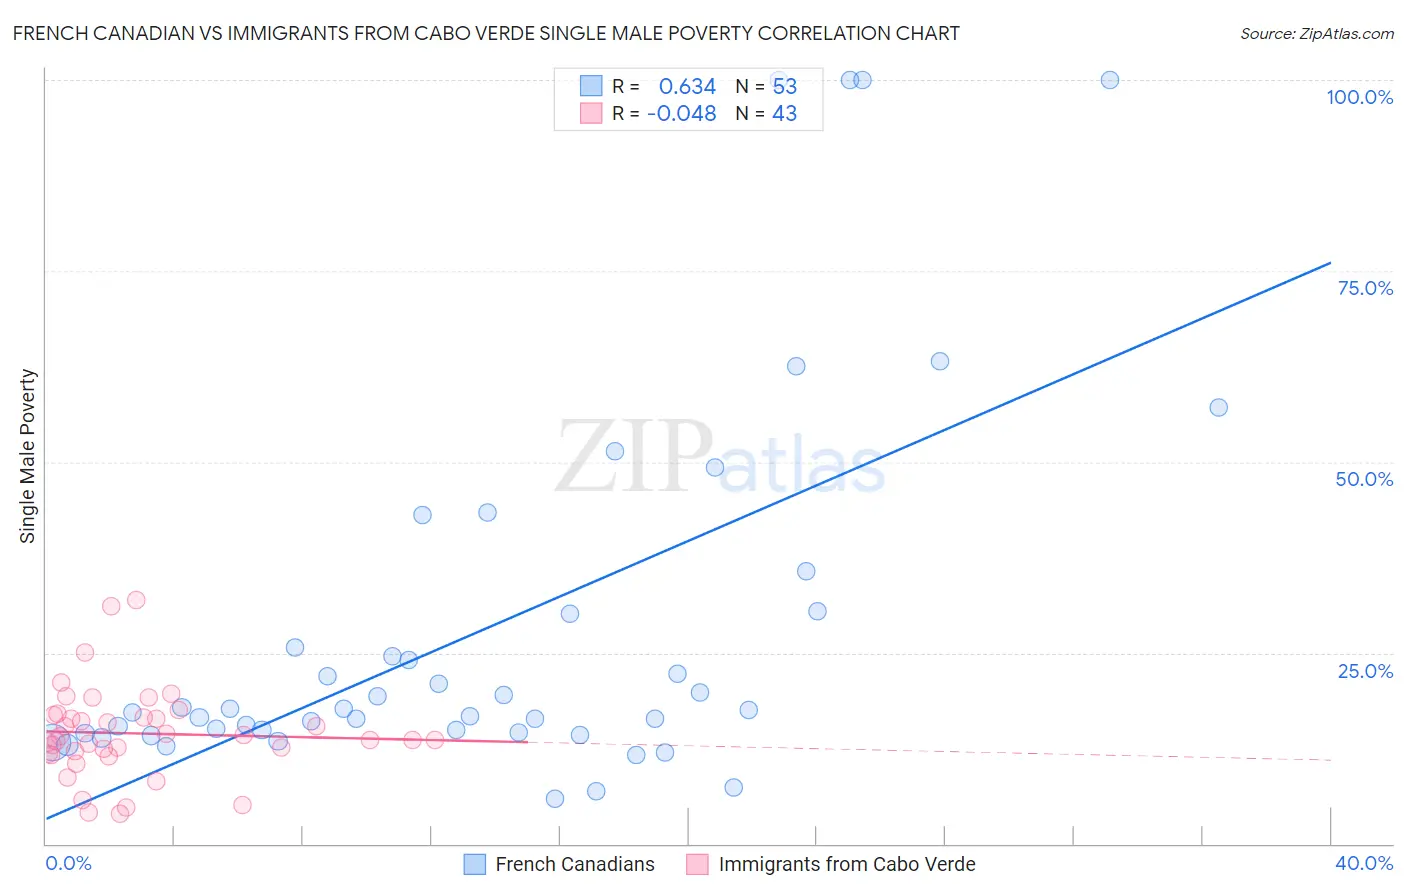 French Canadian vs Immigrants from Cabo Verde Single Male Poverty